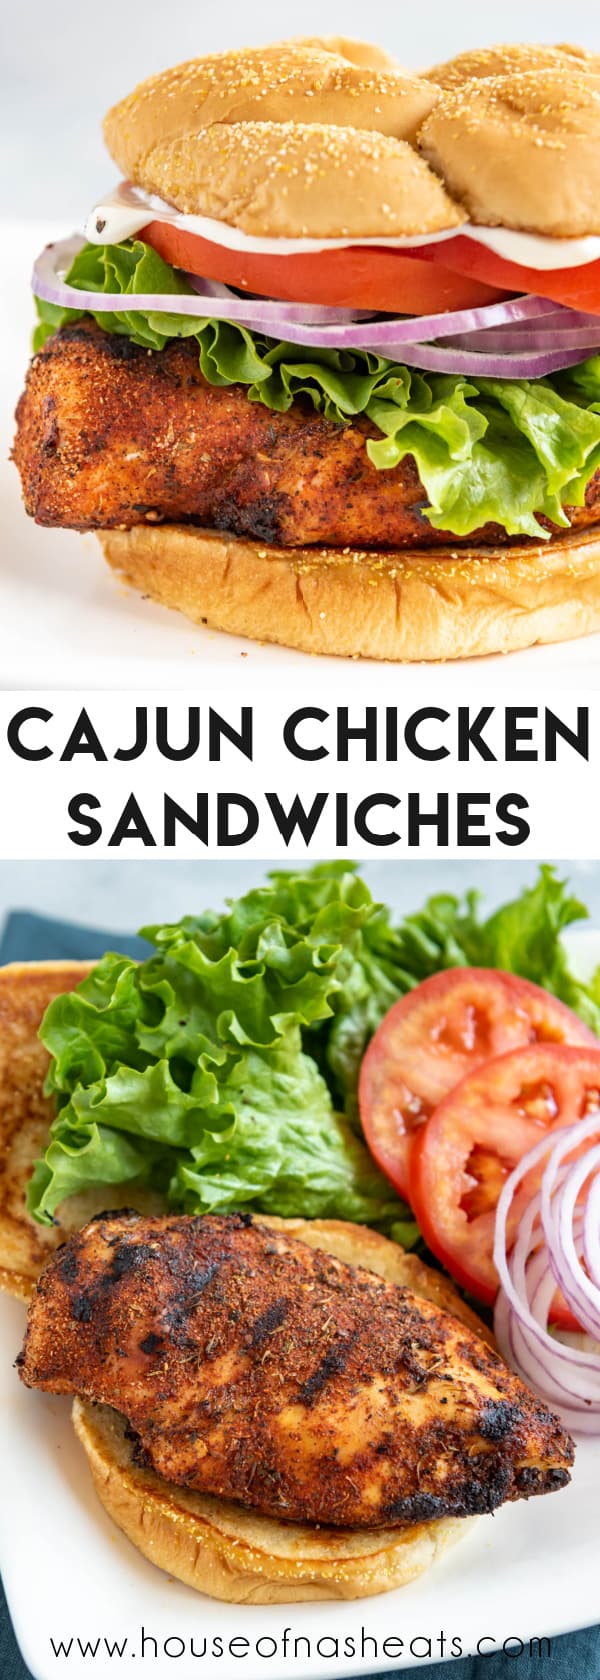 A collage of images of cajun chicken sandwiches with text overlay.